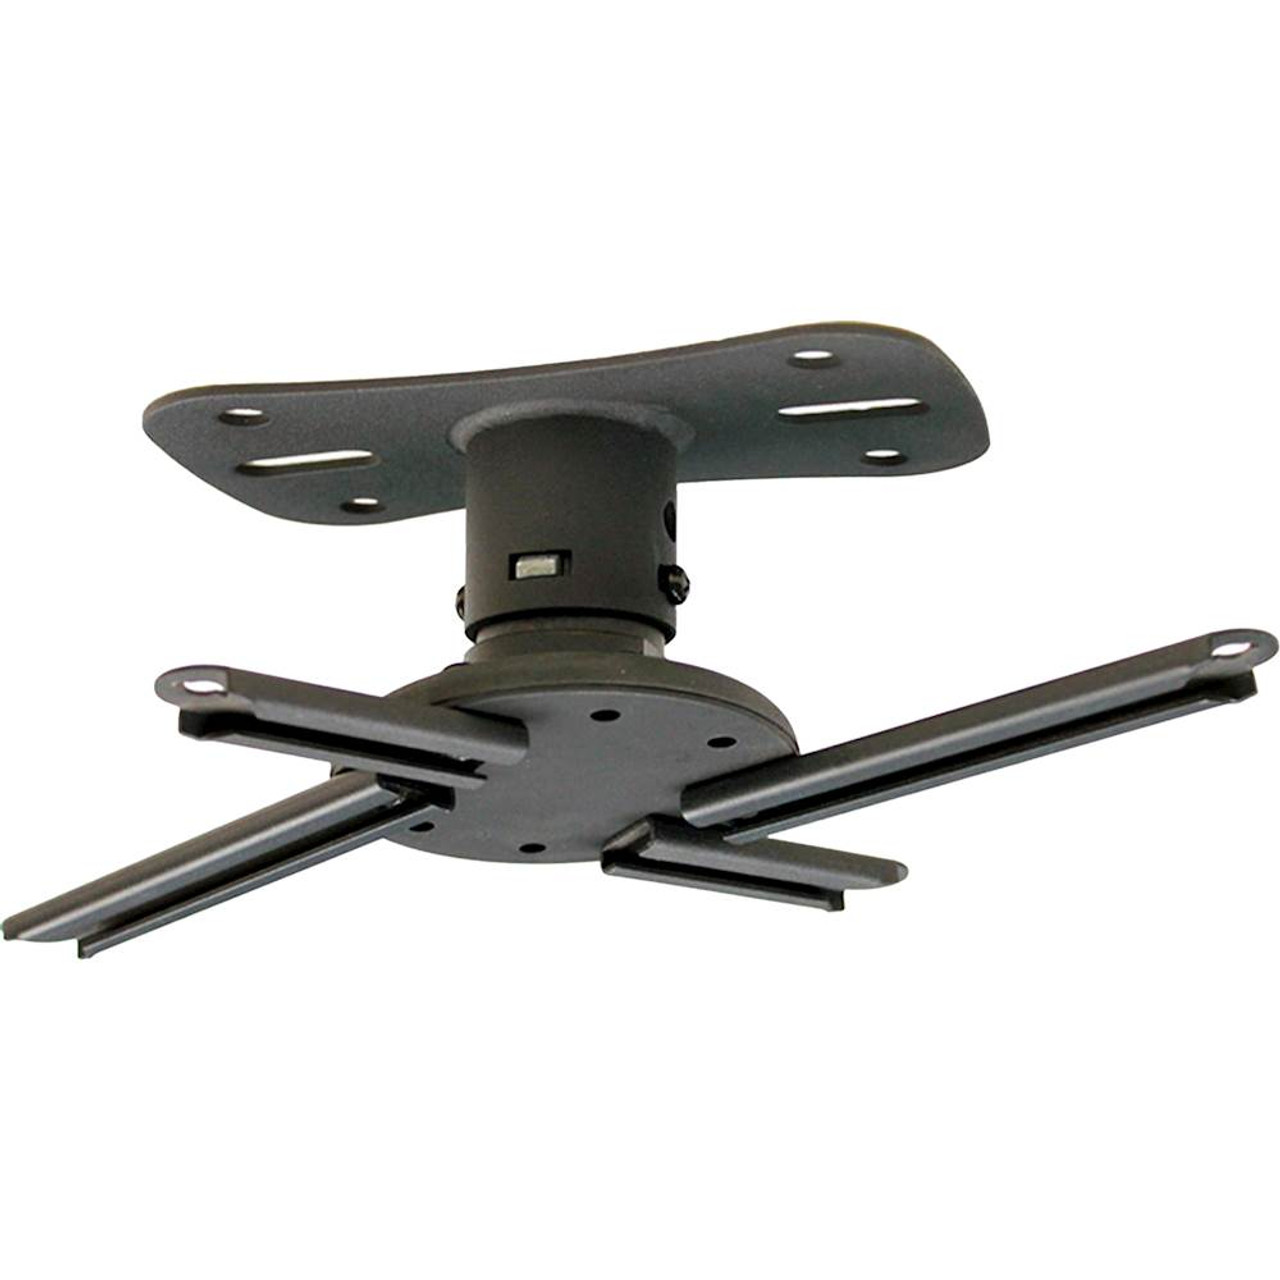 Kanto - Ceiling Mount for Most Projectors - Black